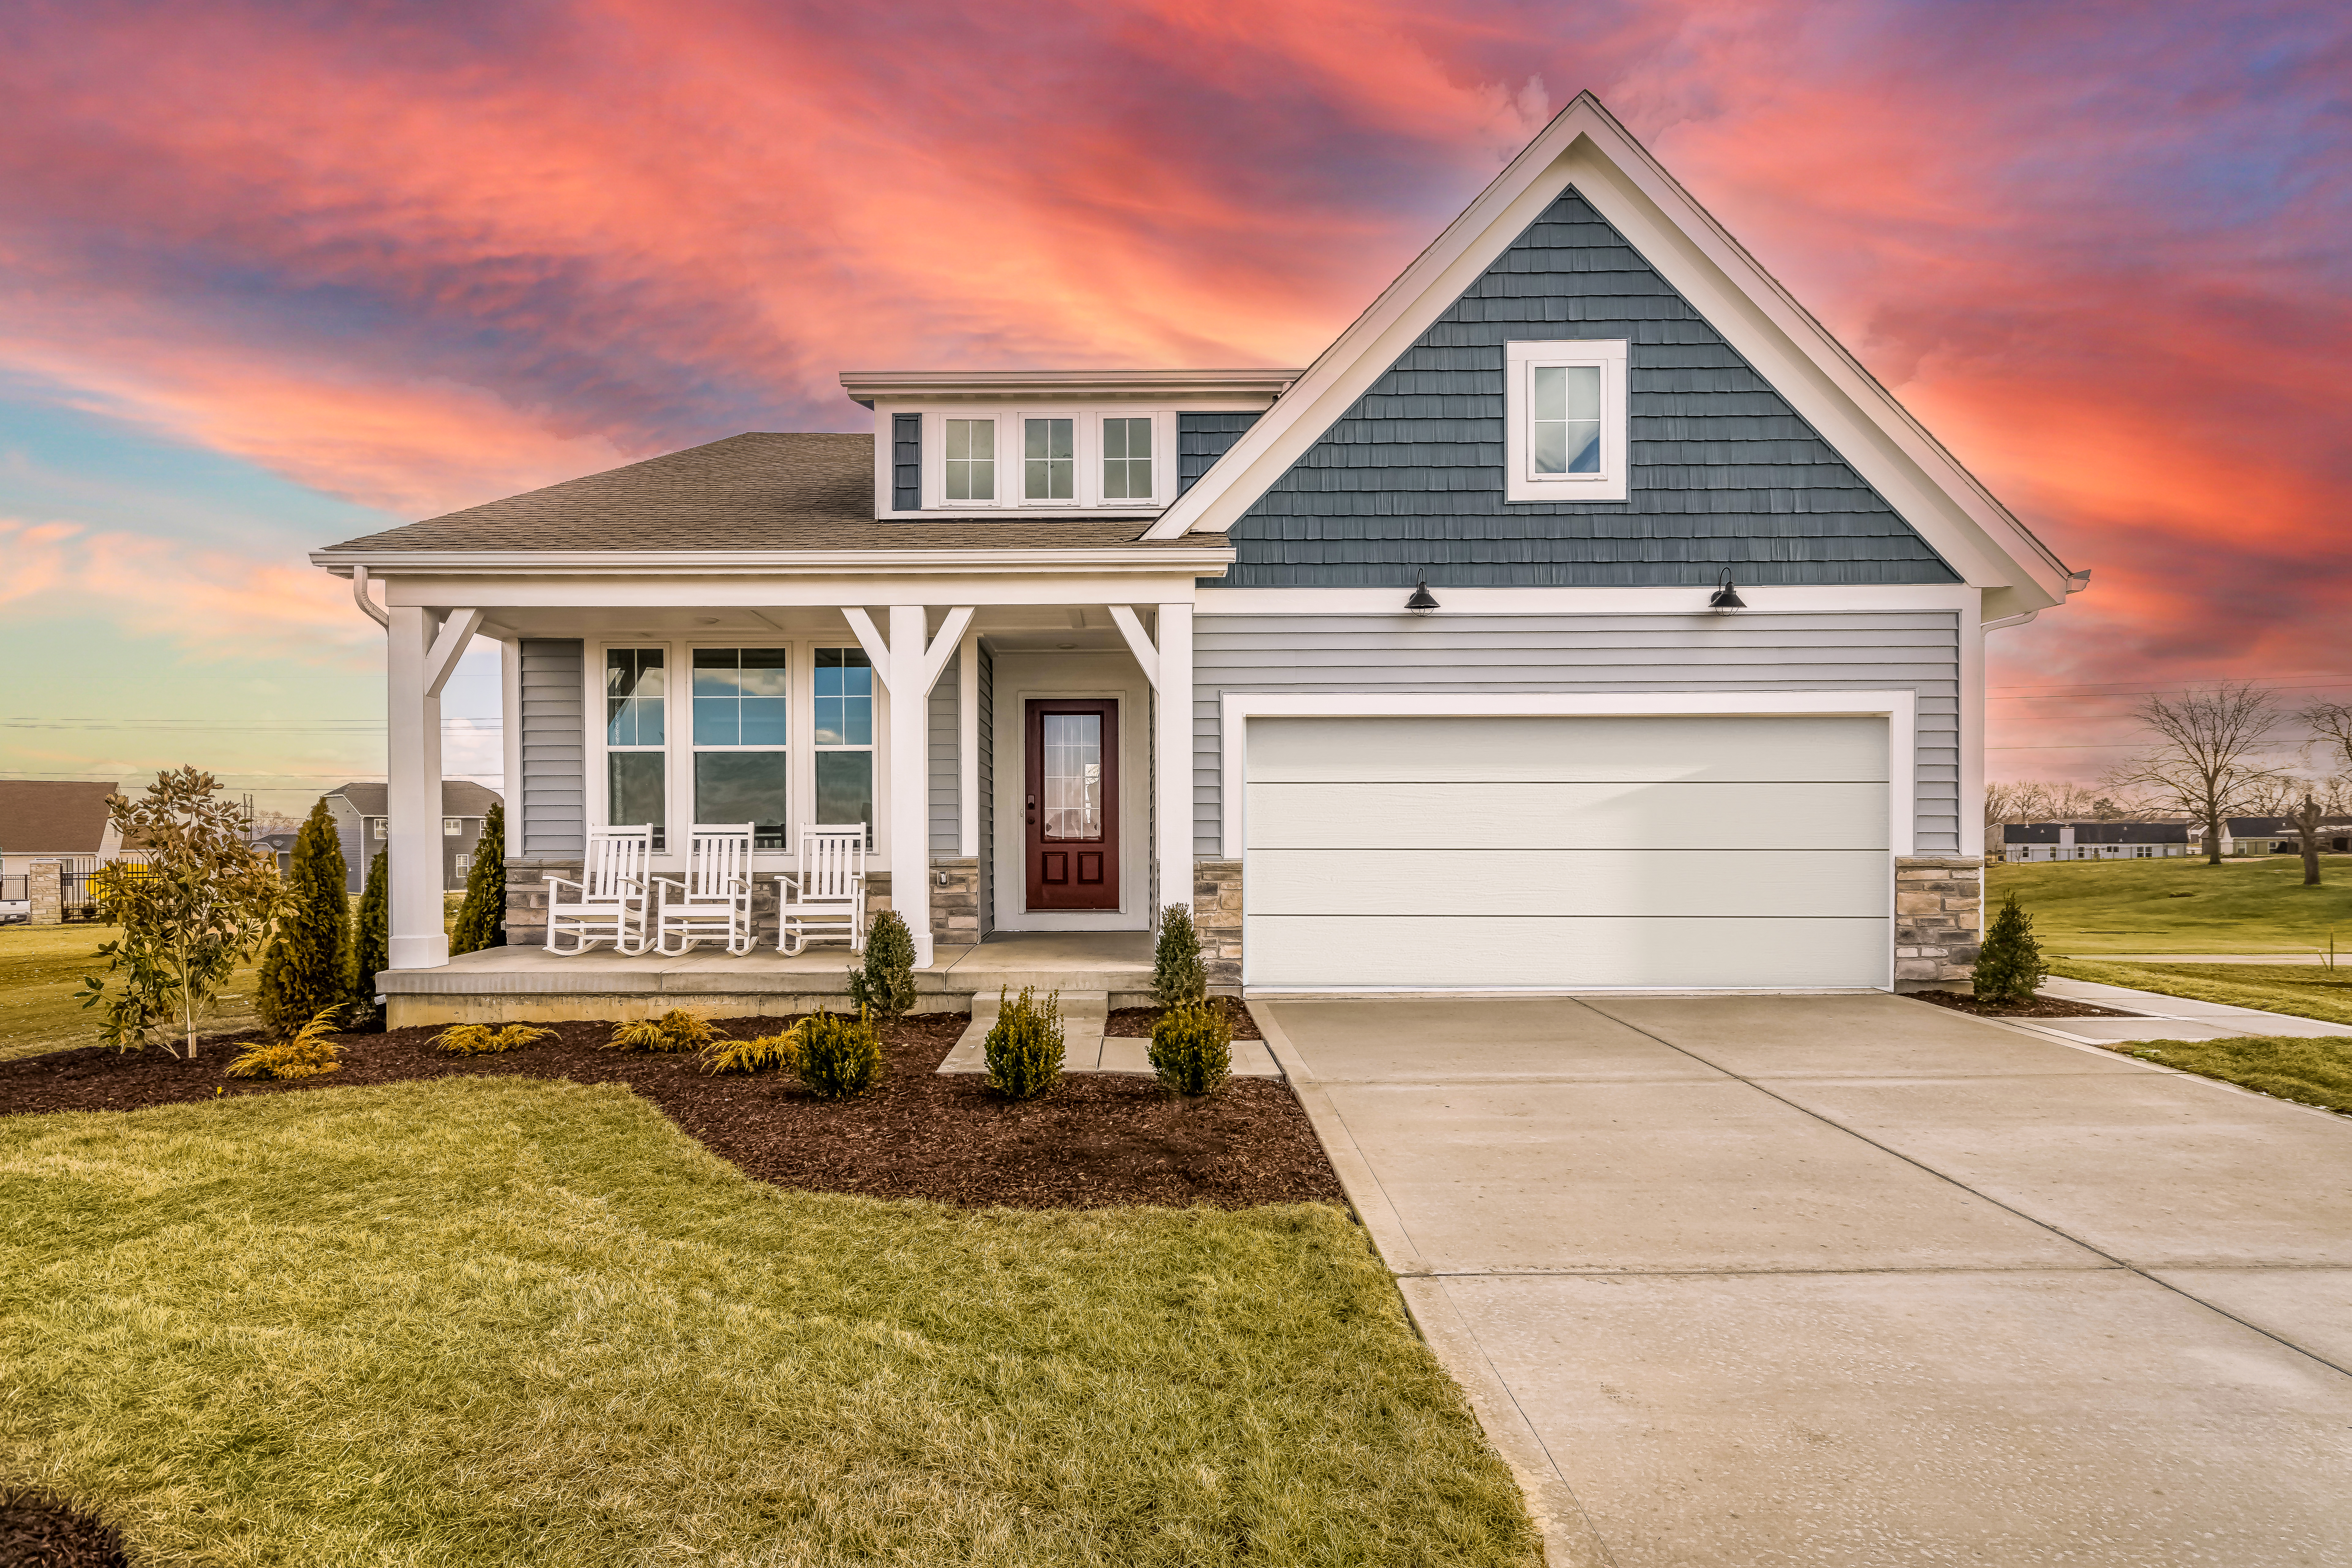 Check out Riverdale's New Model Home Located in St. Paul, Missouri!